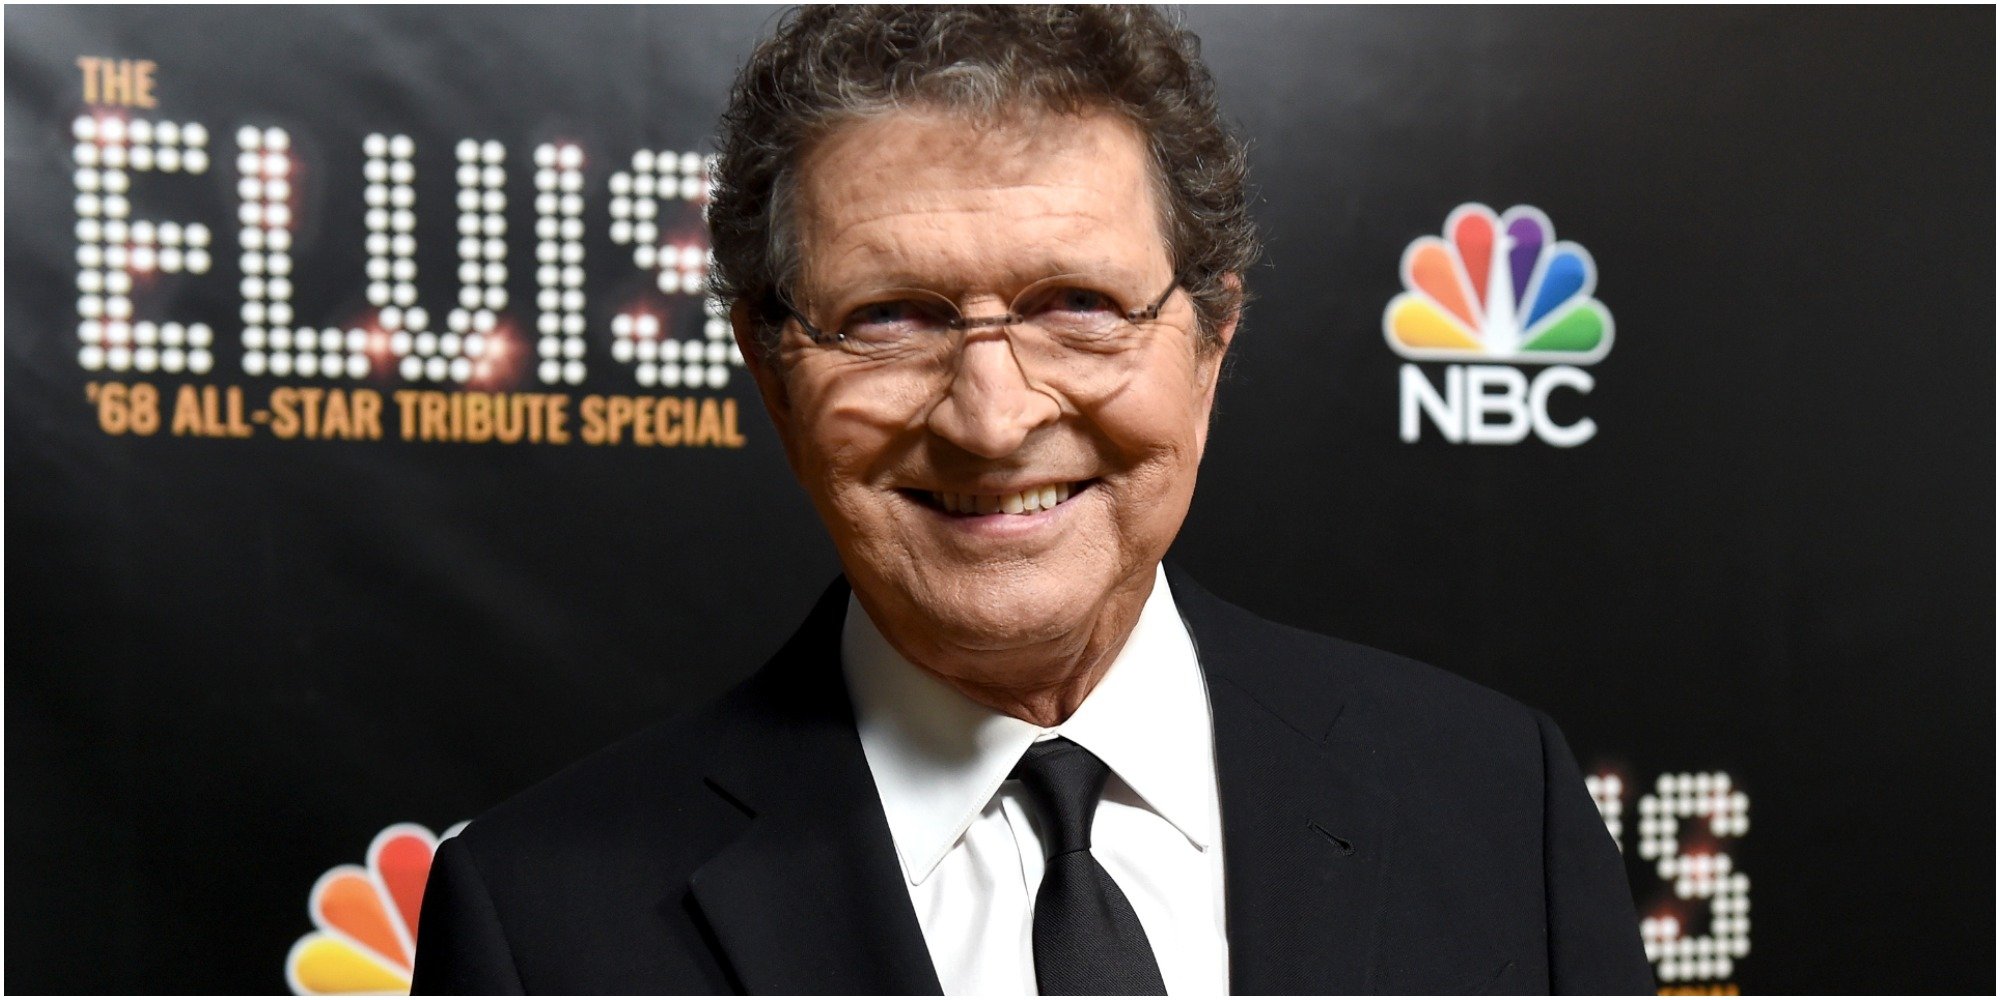 Singer and songwriter Mac Davis appears backstage during The Elvis '68 All-Star Tribute Special at Universal Studios on October 11, 2018 in Universal City, California.